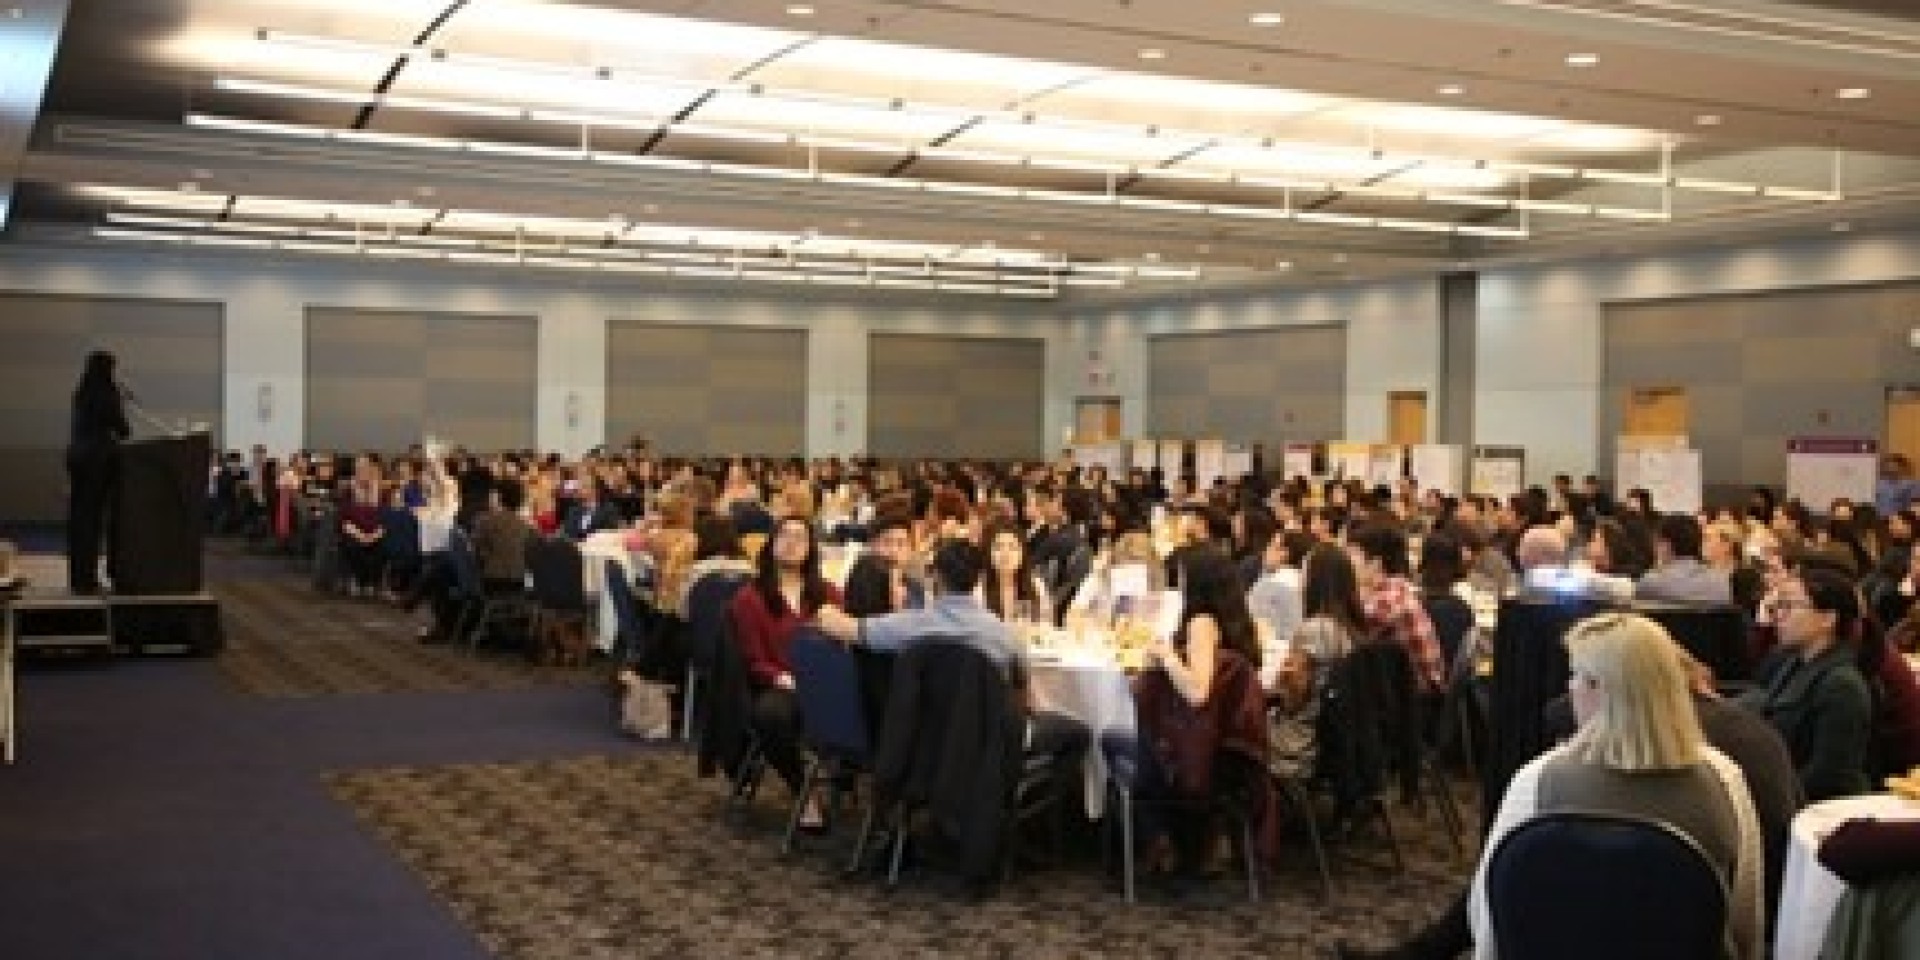 Students attend event